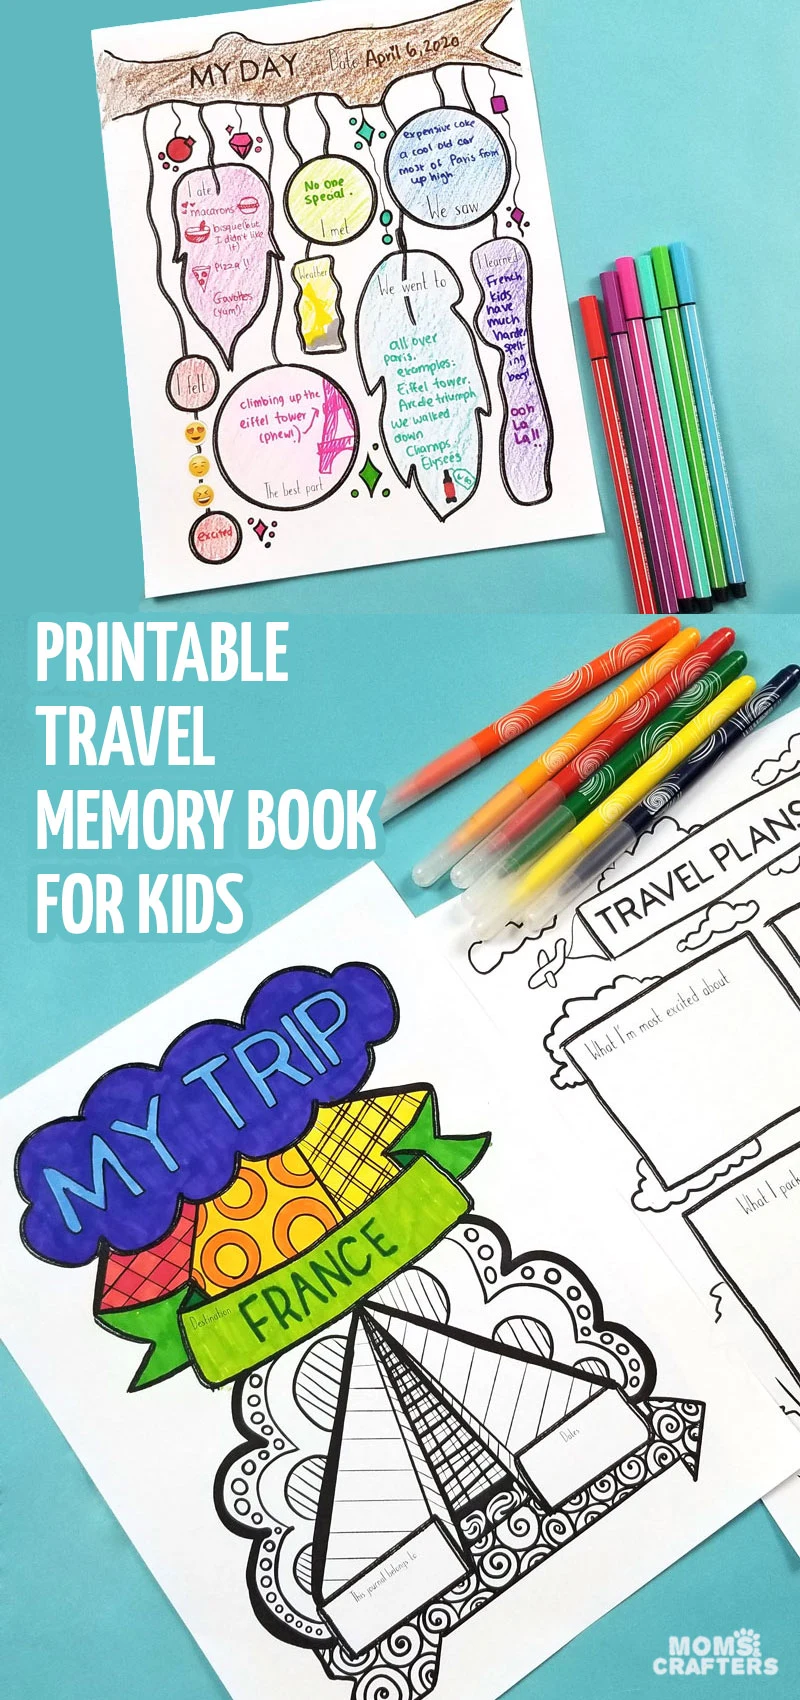 click to print a travel journal for kids - great airplane and road trip activities for kids ages 8+ teens and tweens! This travel coloring book and memory book is fun and educational for travel with kids.